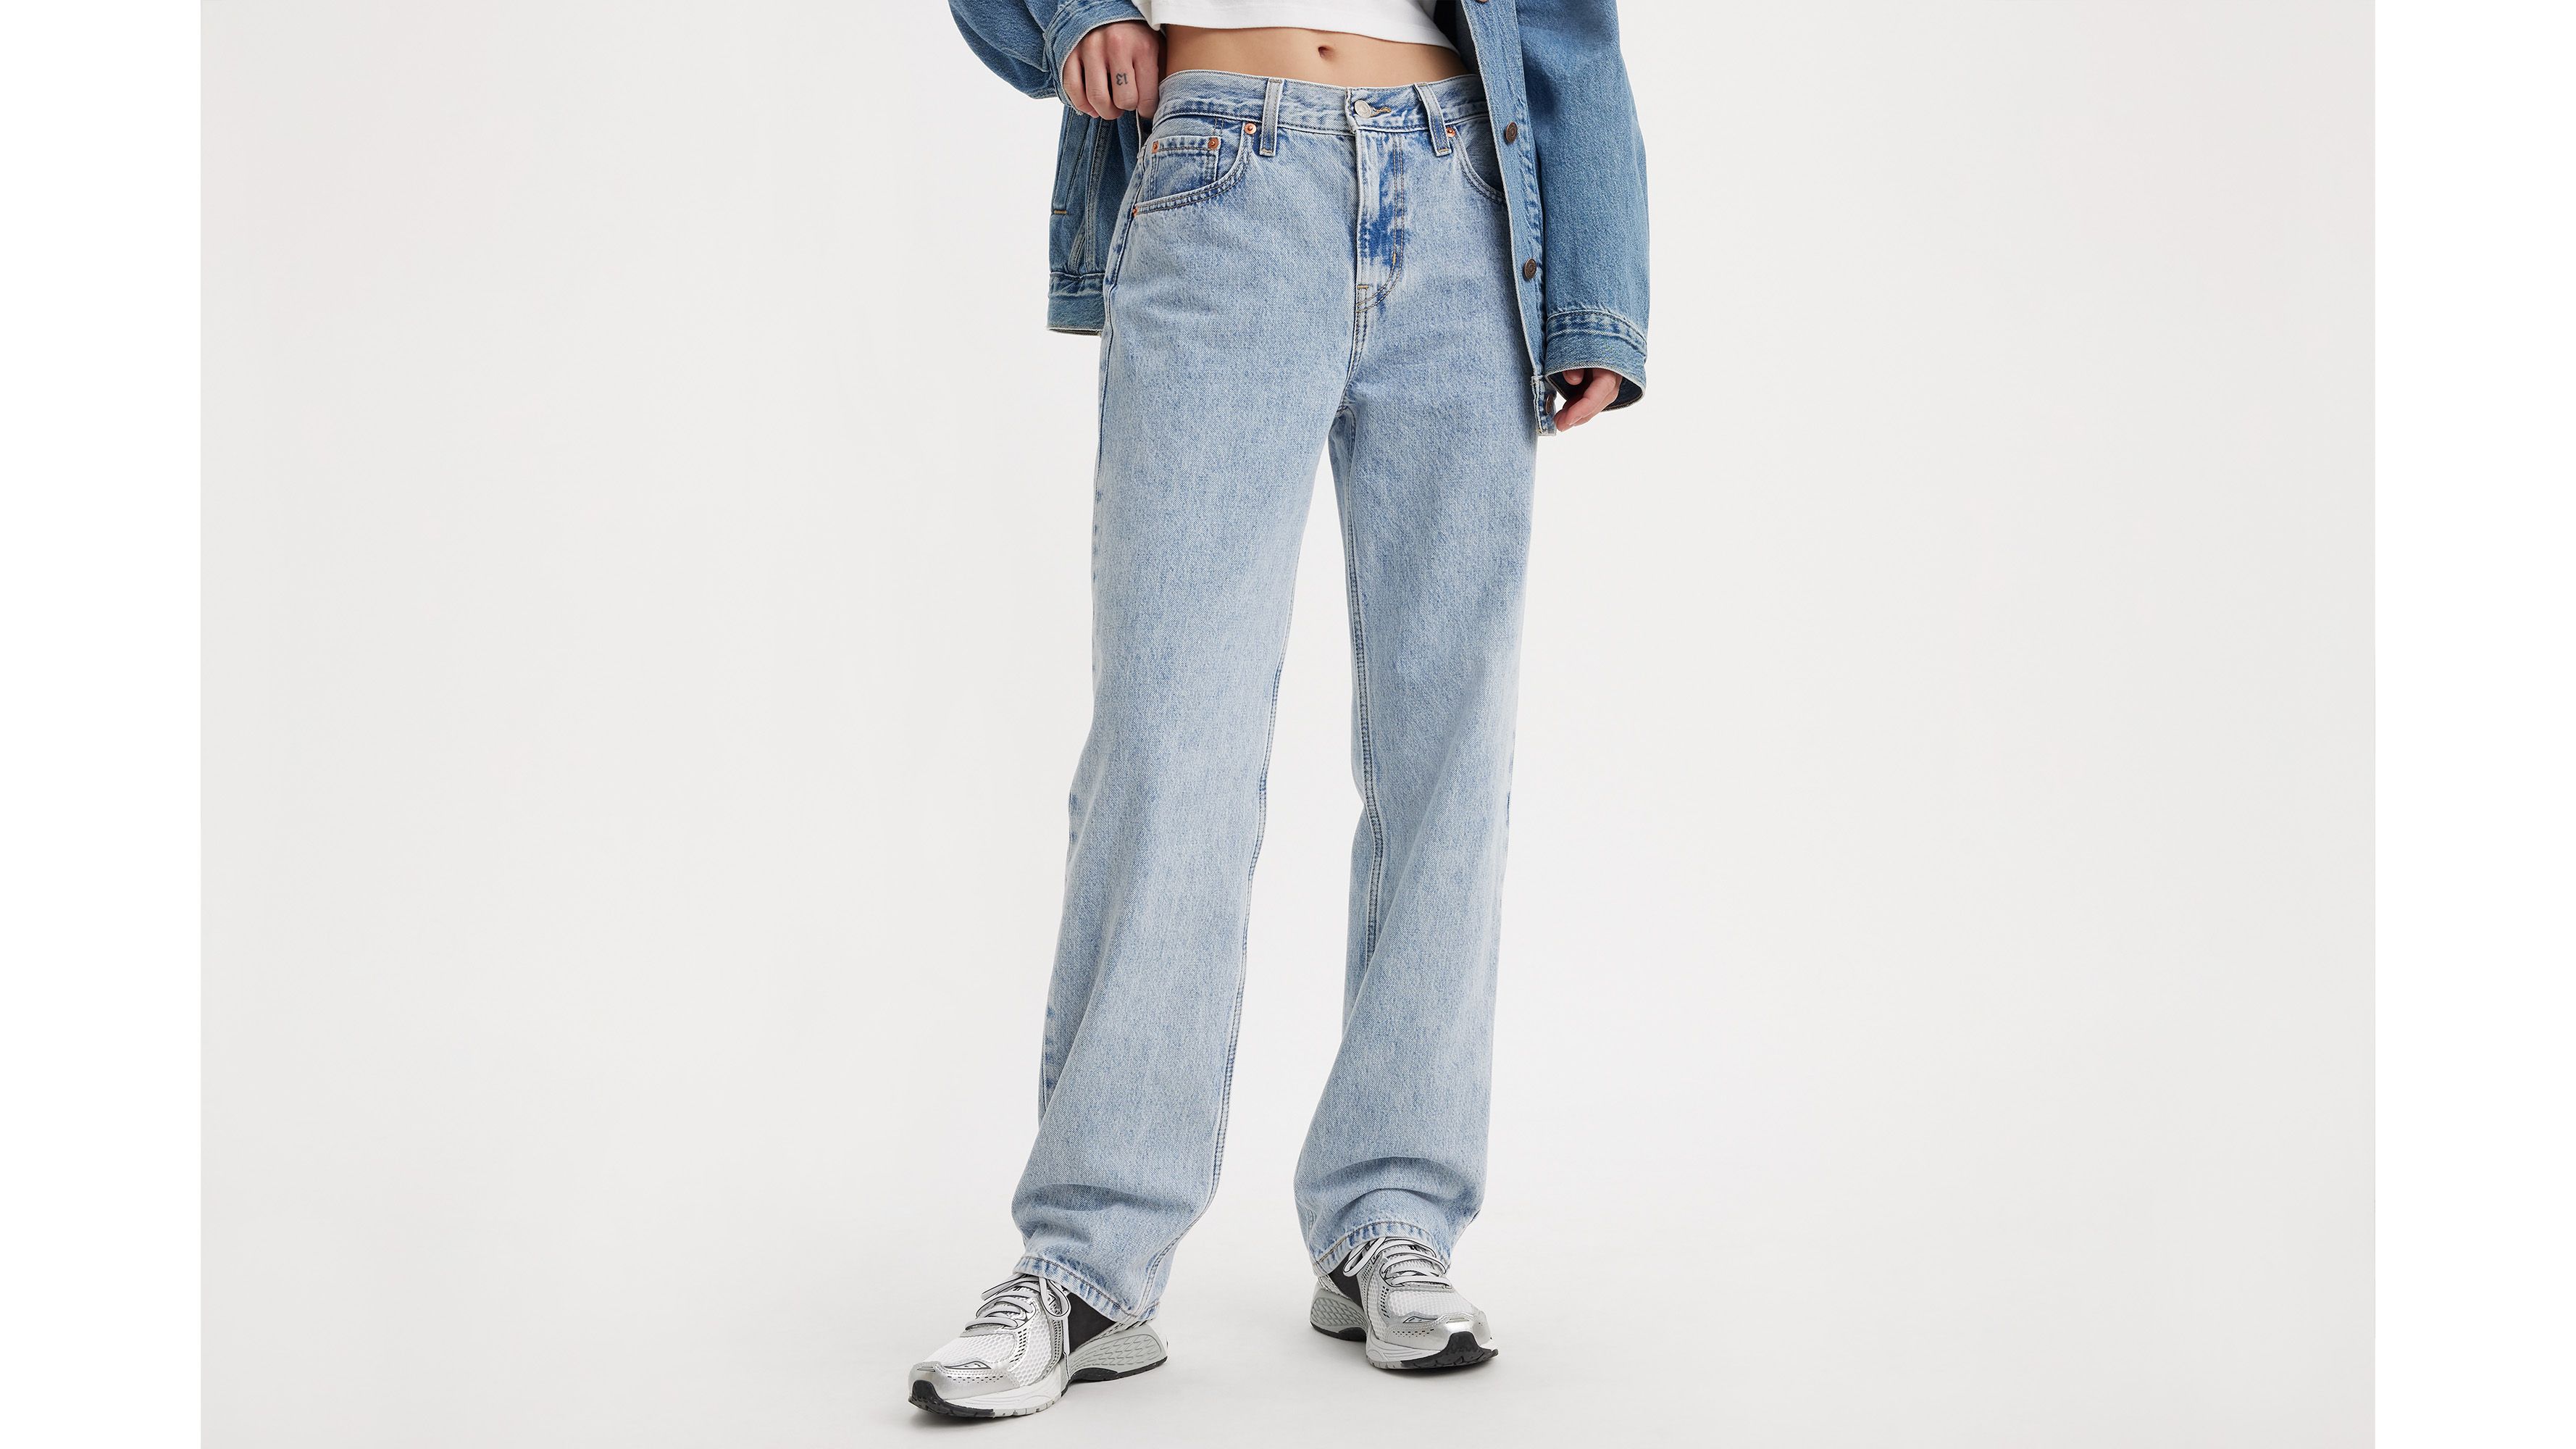 Levi's low pro straight leg jeans in mid wash